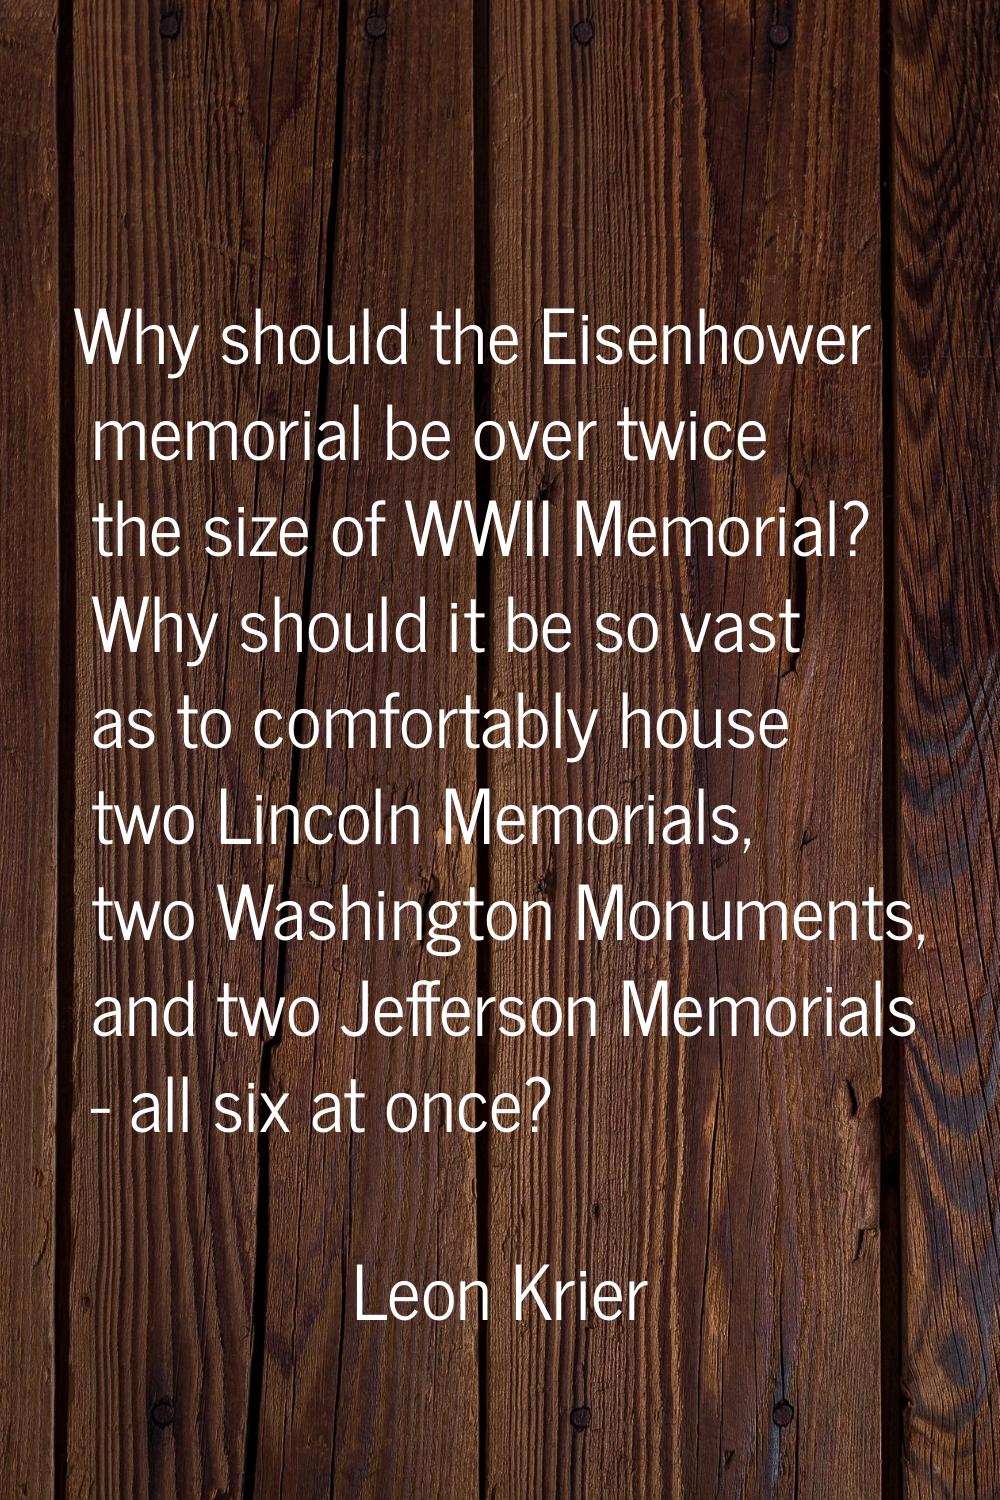 Why should the Eisenhower memorial be over twice the size of WWII Memorial? Why should it be so vas